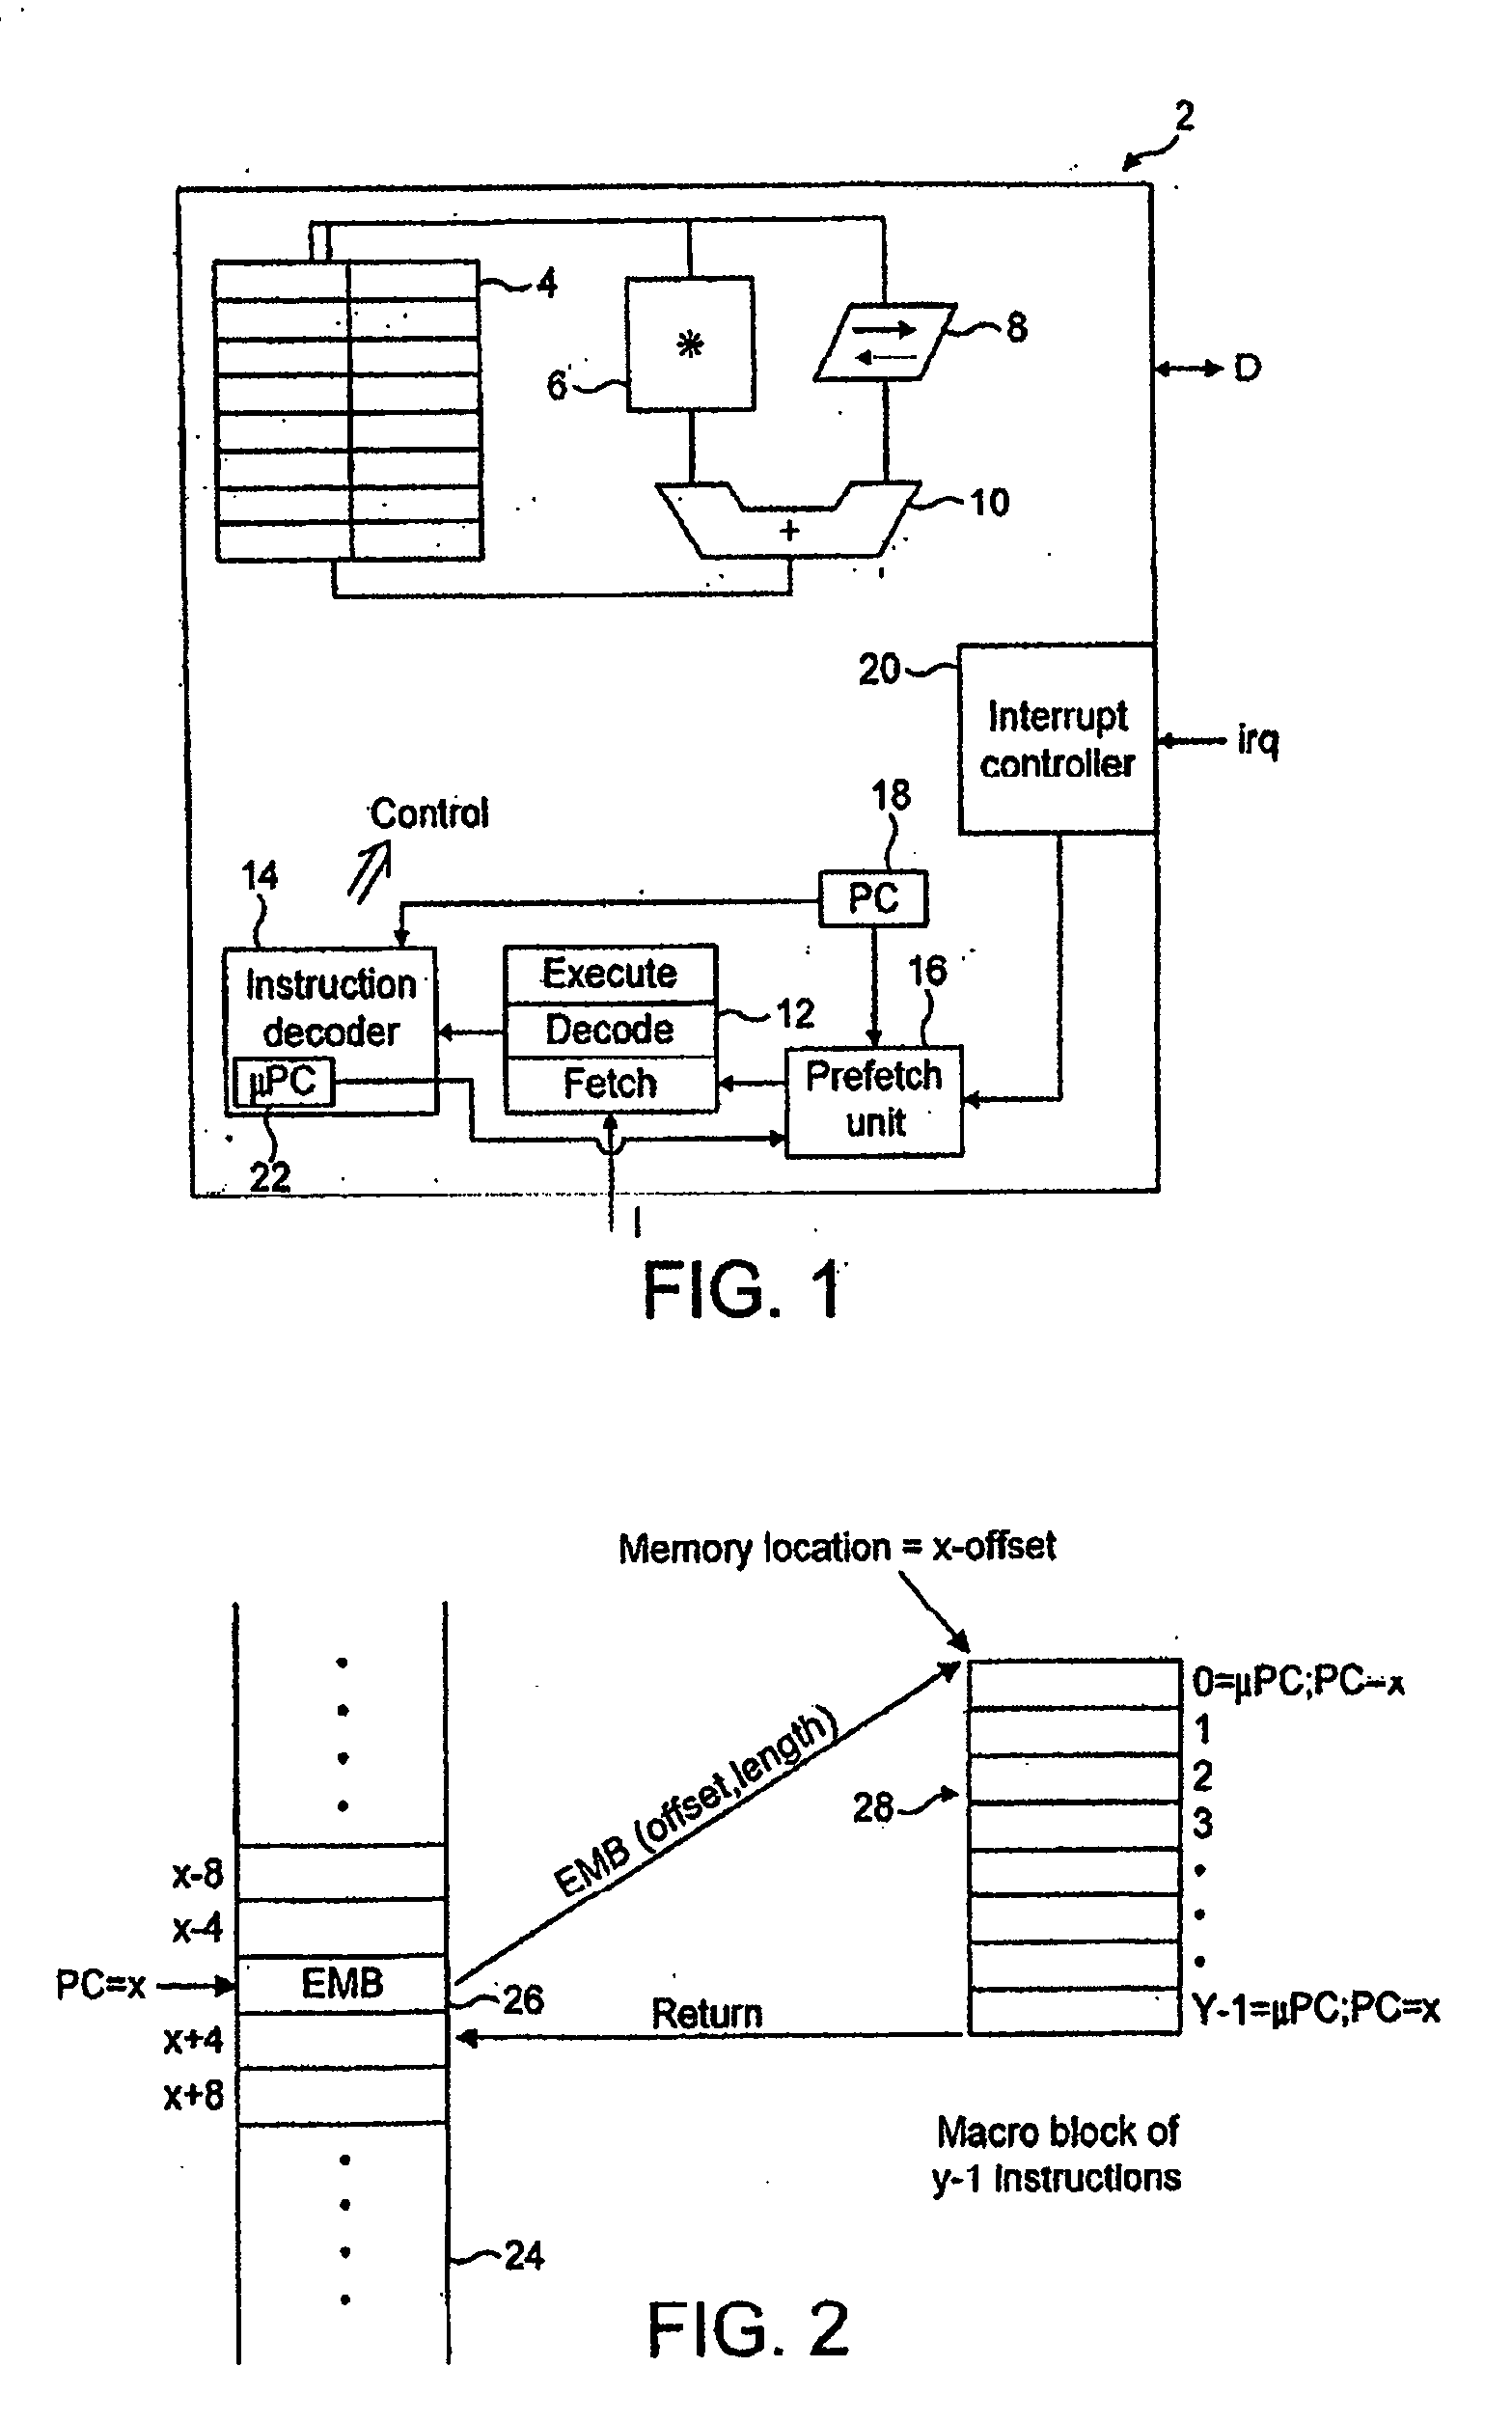 Controlling execution of a block of program instructions within a computer processing system